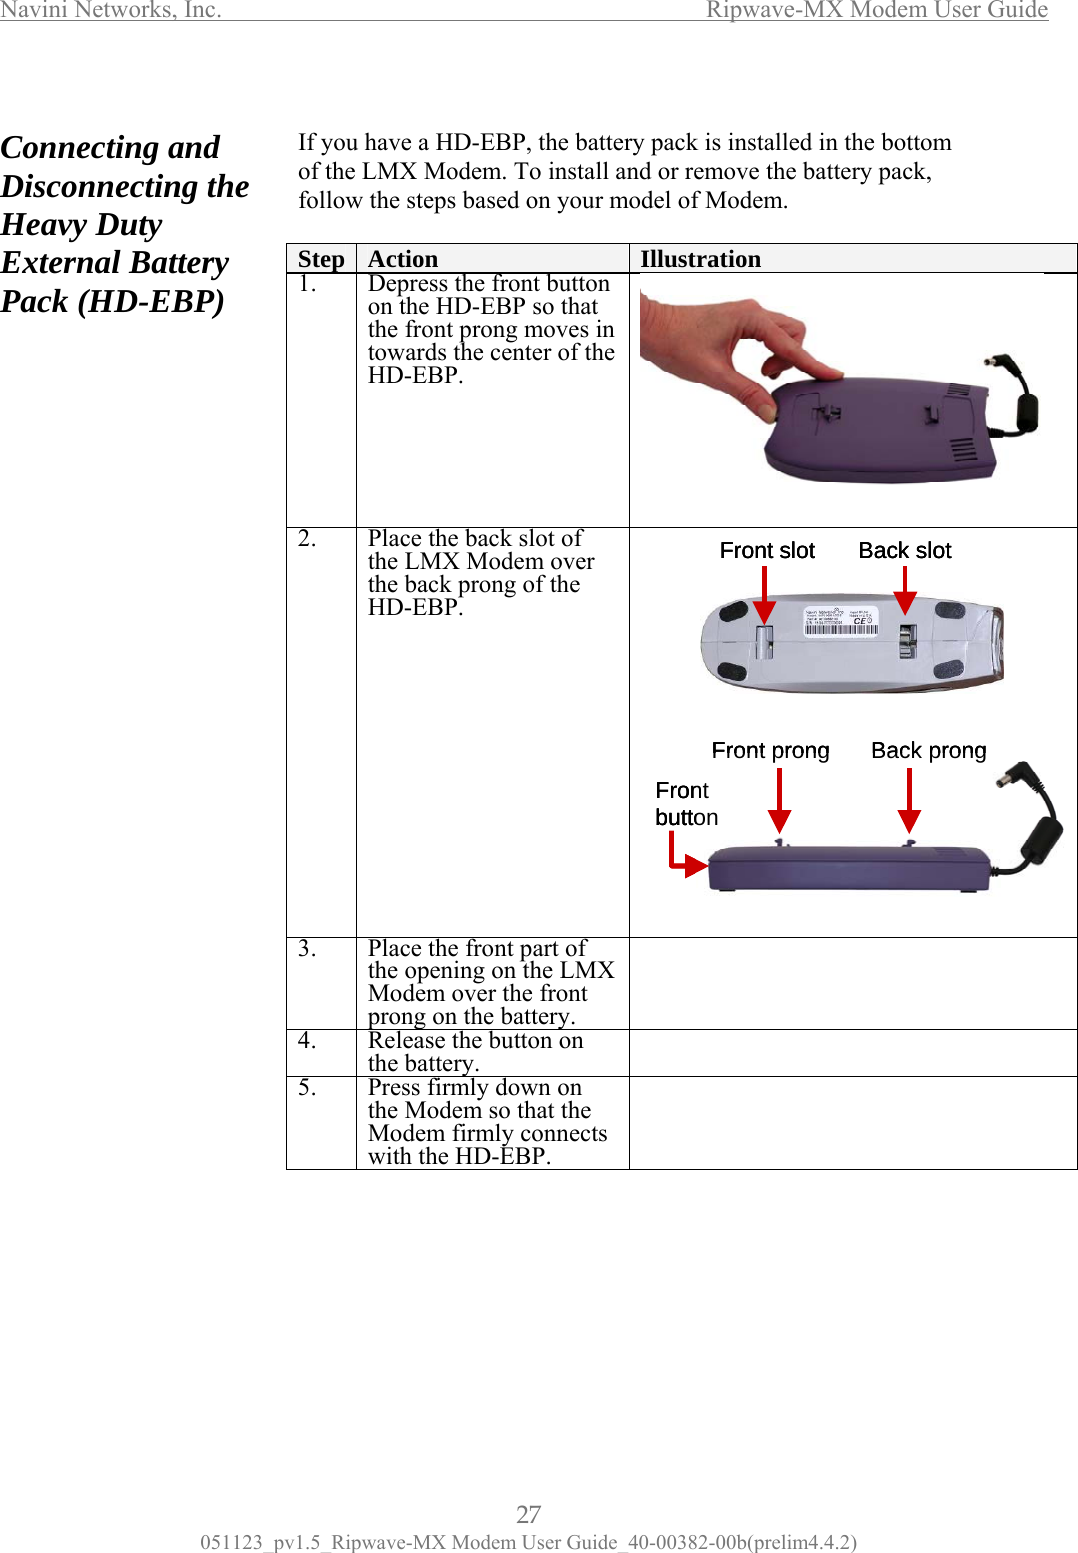 Navini Networks, Inc.                  Ripwave-MX Modem User Guide 051123_pv1.5_Ripwave-MX Modem User Guide_40-00382-00b(prelim4.4.2) nd  isconnecting the eavy Duty xternal Battery ack (HD-EBP)  If yof t ck, foll  Connecting aDHEP                                        ou have a HD-EBP, the battery pack is installed in the bottom he LMX Modem. To install and or remove the battery paow the steps based on your model of Modem. Step  Action  Illustration 1.  De e front buon the HD-EBP so that the front prong moves intowards the center of theH press th tton   D-EBP. 2.  Place the back slot of the LMX Modem over the back prong of the HD-EBP.  3.  Place the front part of the opening on the LMX Modem over the front prong on the battery.  4.  Release the button on the battery.   5.  Press firmly down on the Modem so that the Modem firmly connects with the HD-EBP.           FrontbuttonFront prong Back prongFront slot Back slotFrontbuttonFront prong Back prongFrontbuttonFront prong Back prongFront slot Back slotFront slot Back sl ot27 